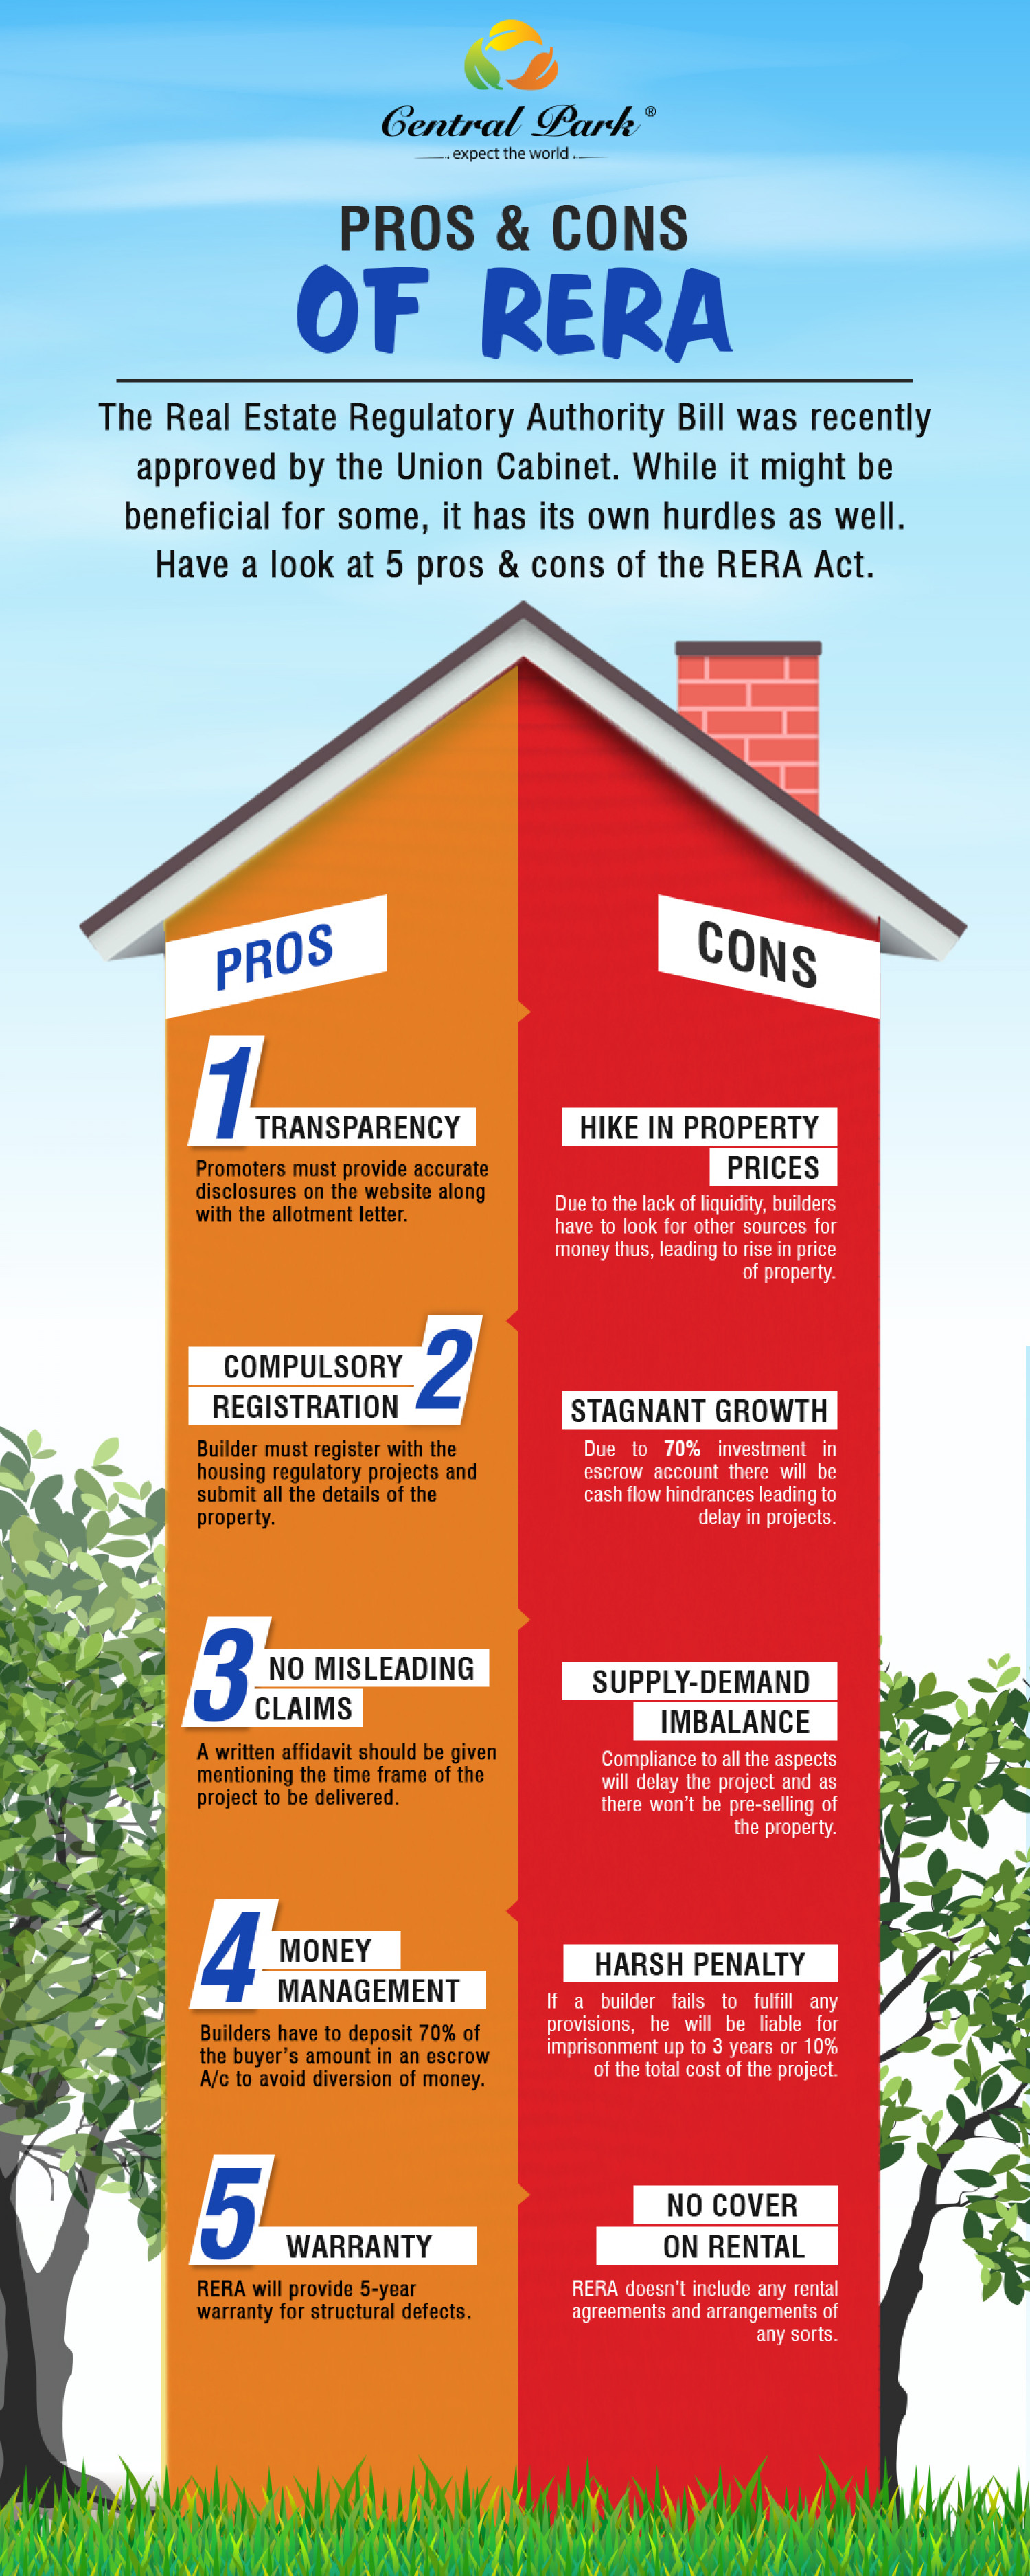 Pros and Cons of RERA Update